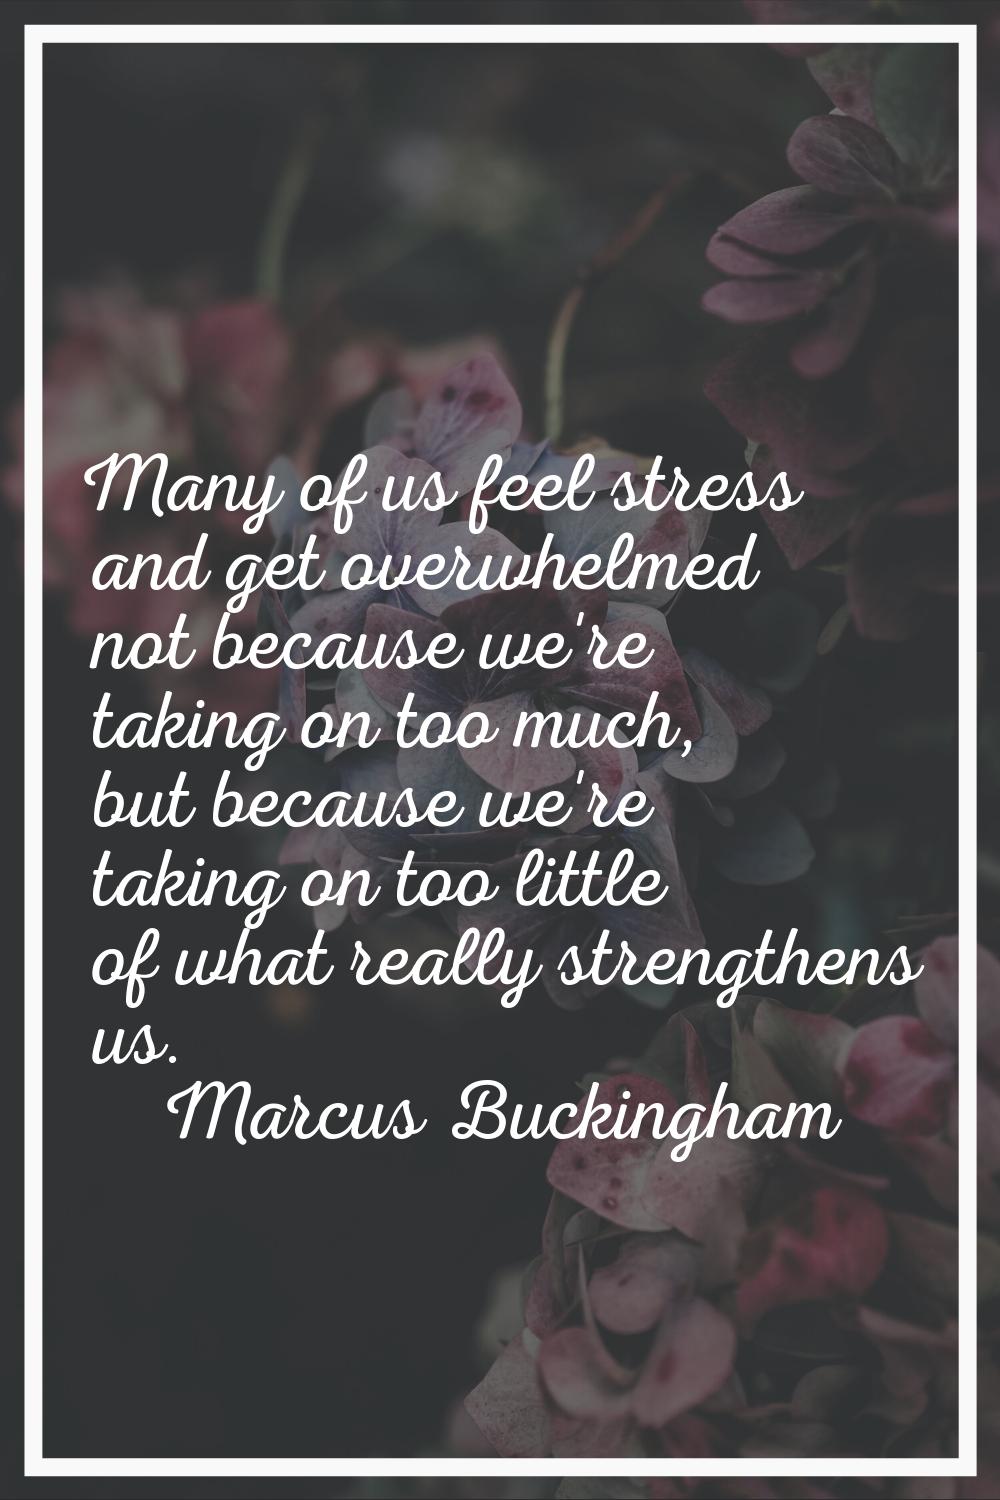 Many of us feel stress and get overwhelmed not because we're taking on too much, but because we're 